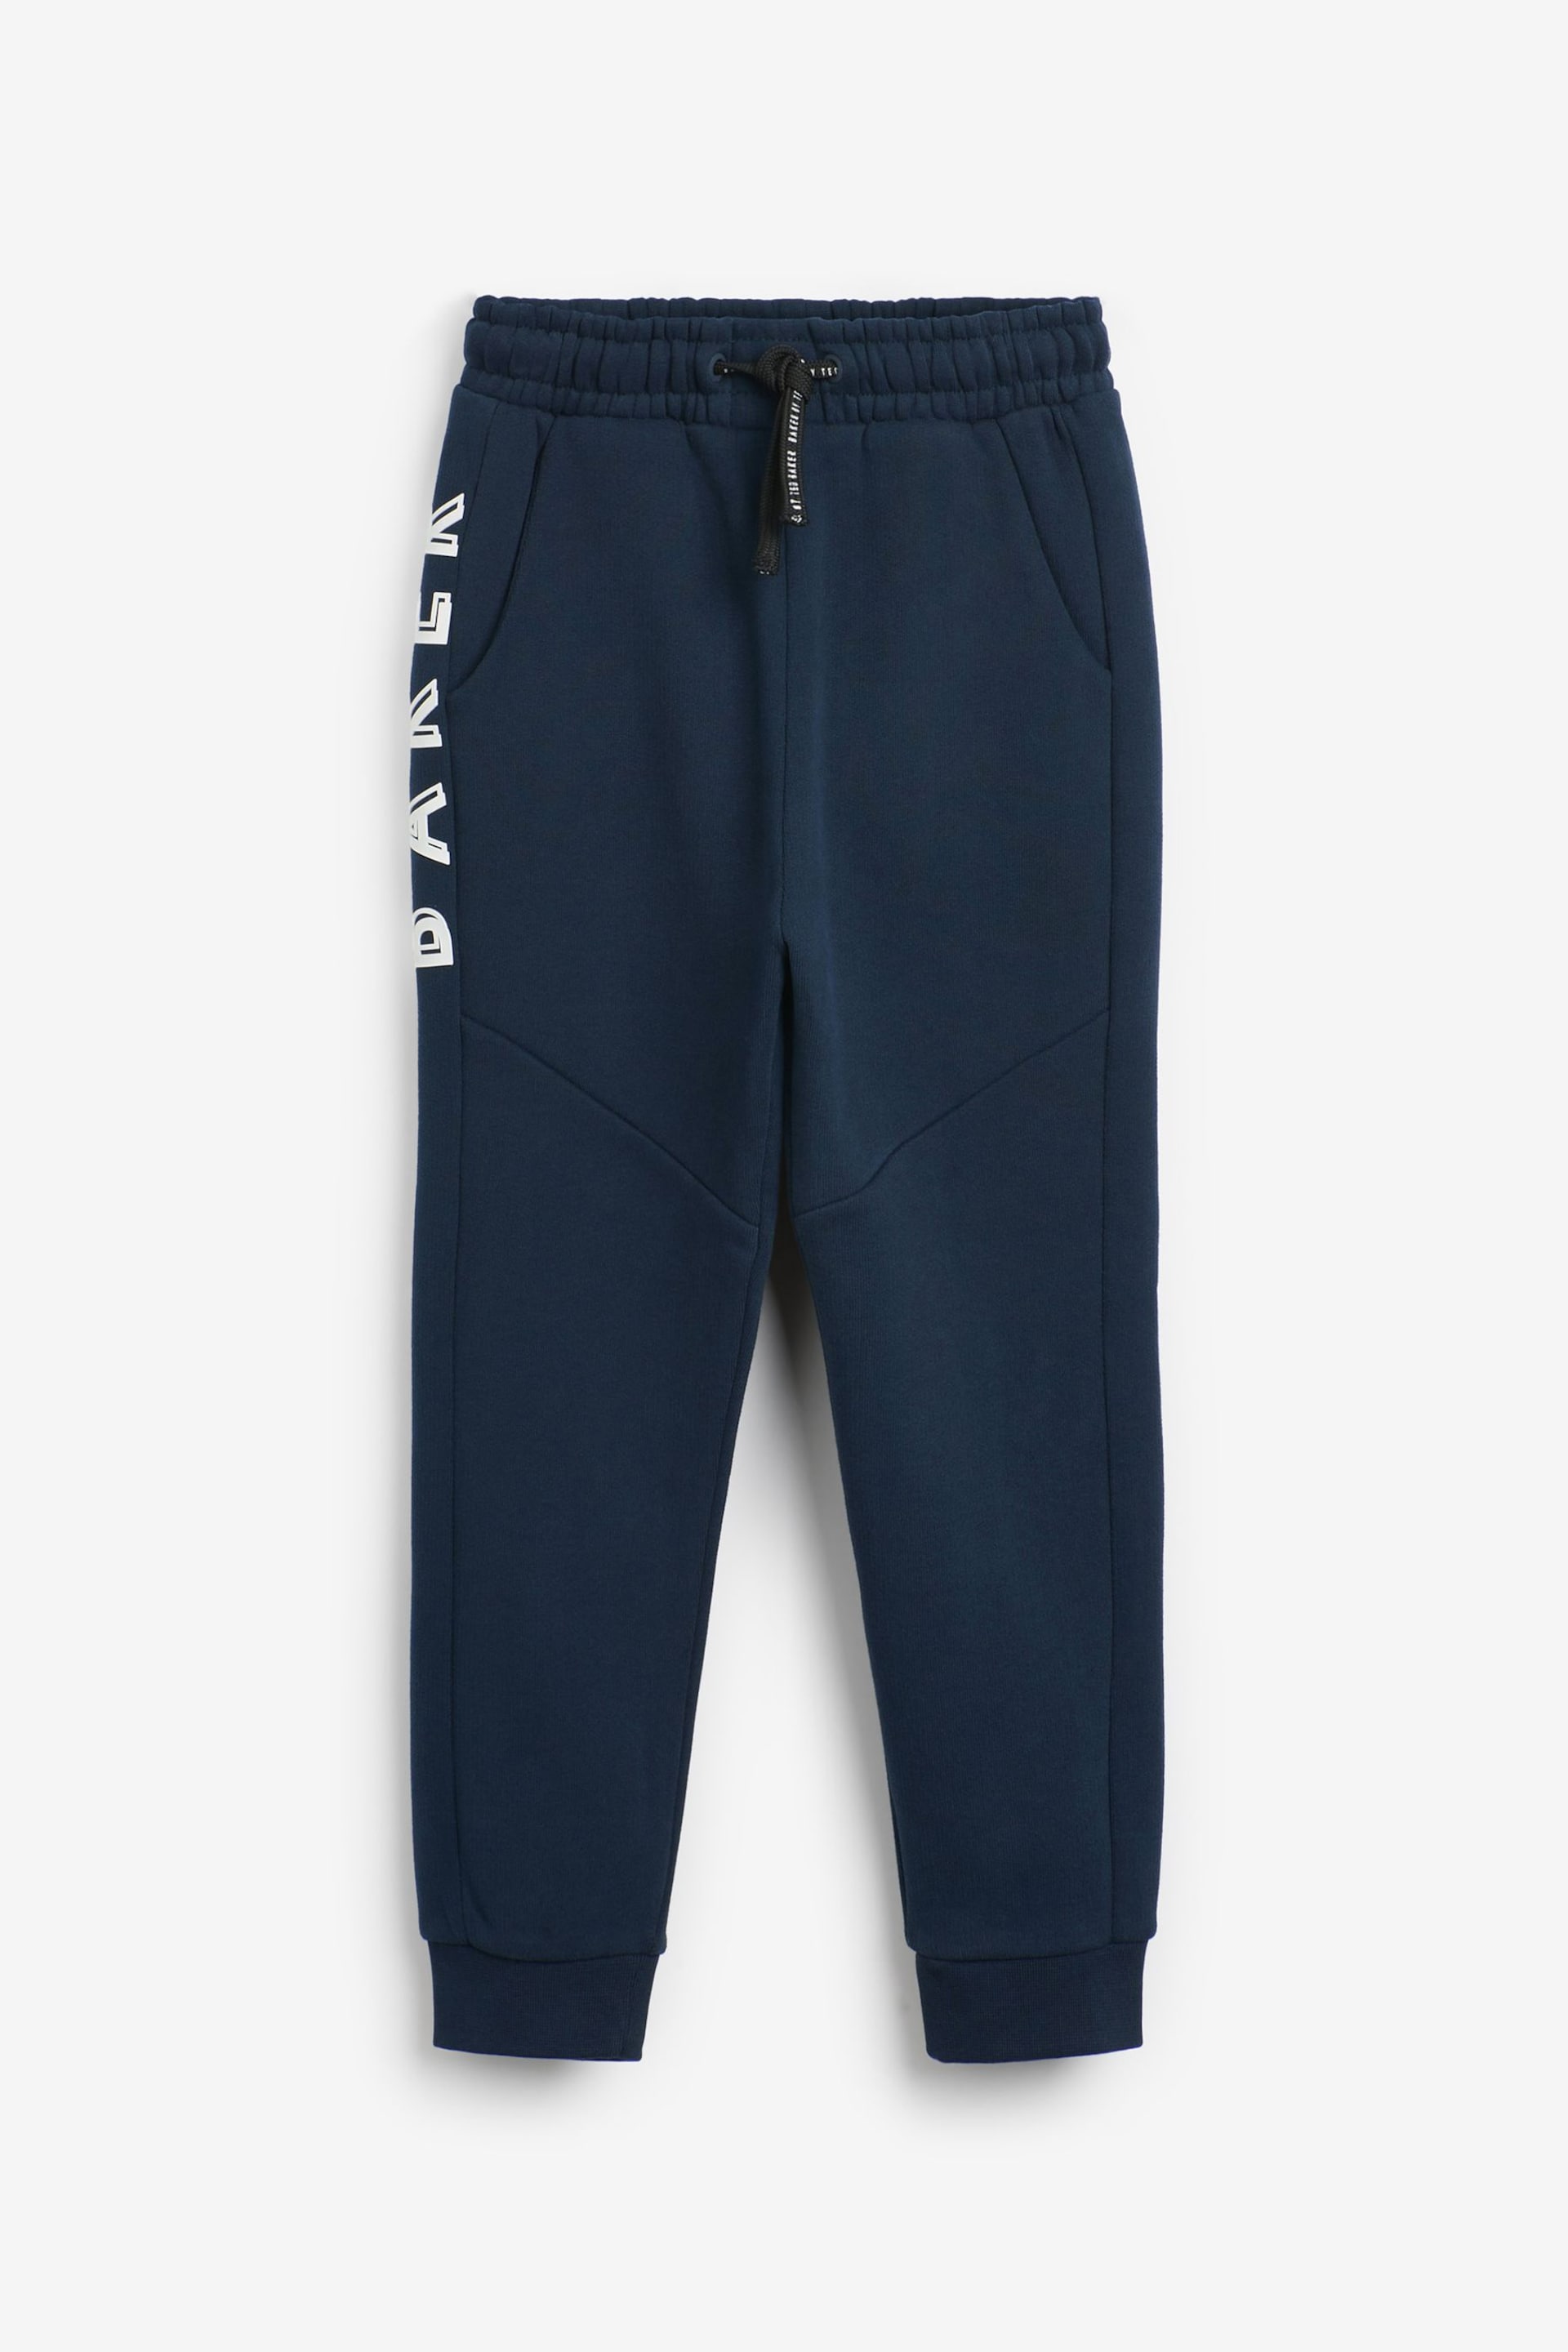 Baker by Ted Baker Joggers - Image 7 of 10